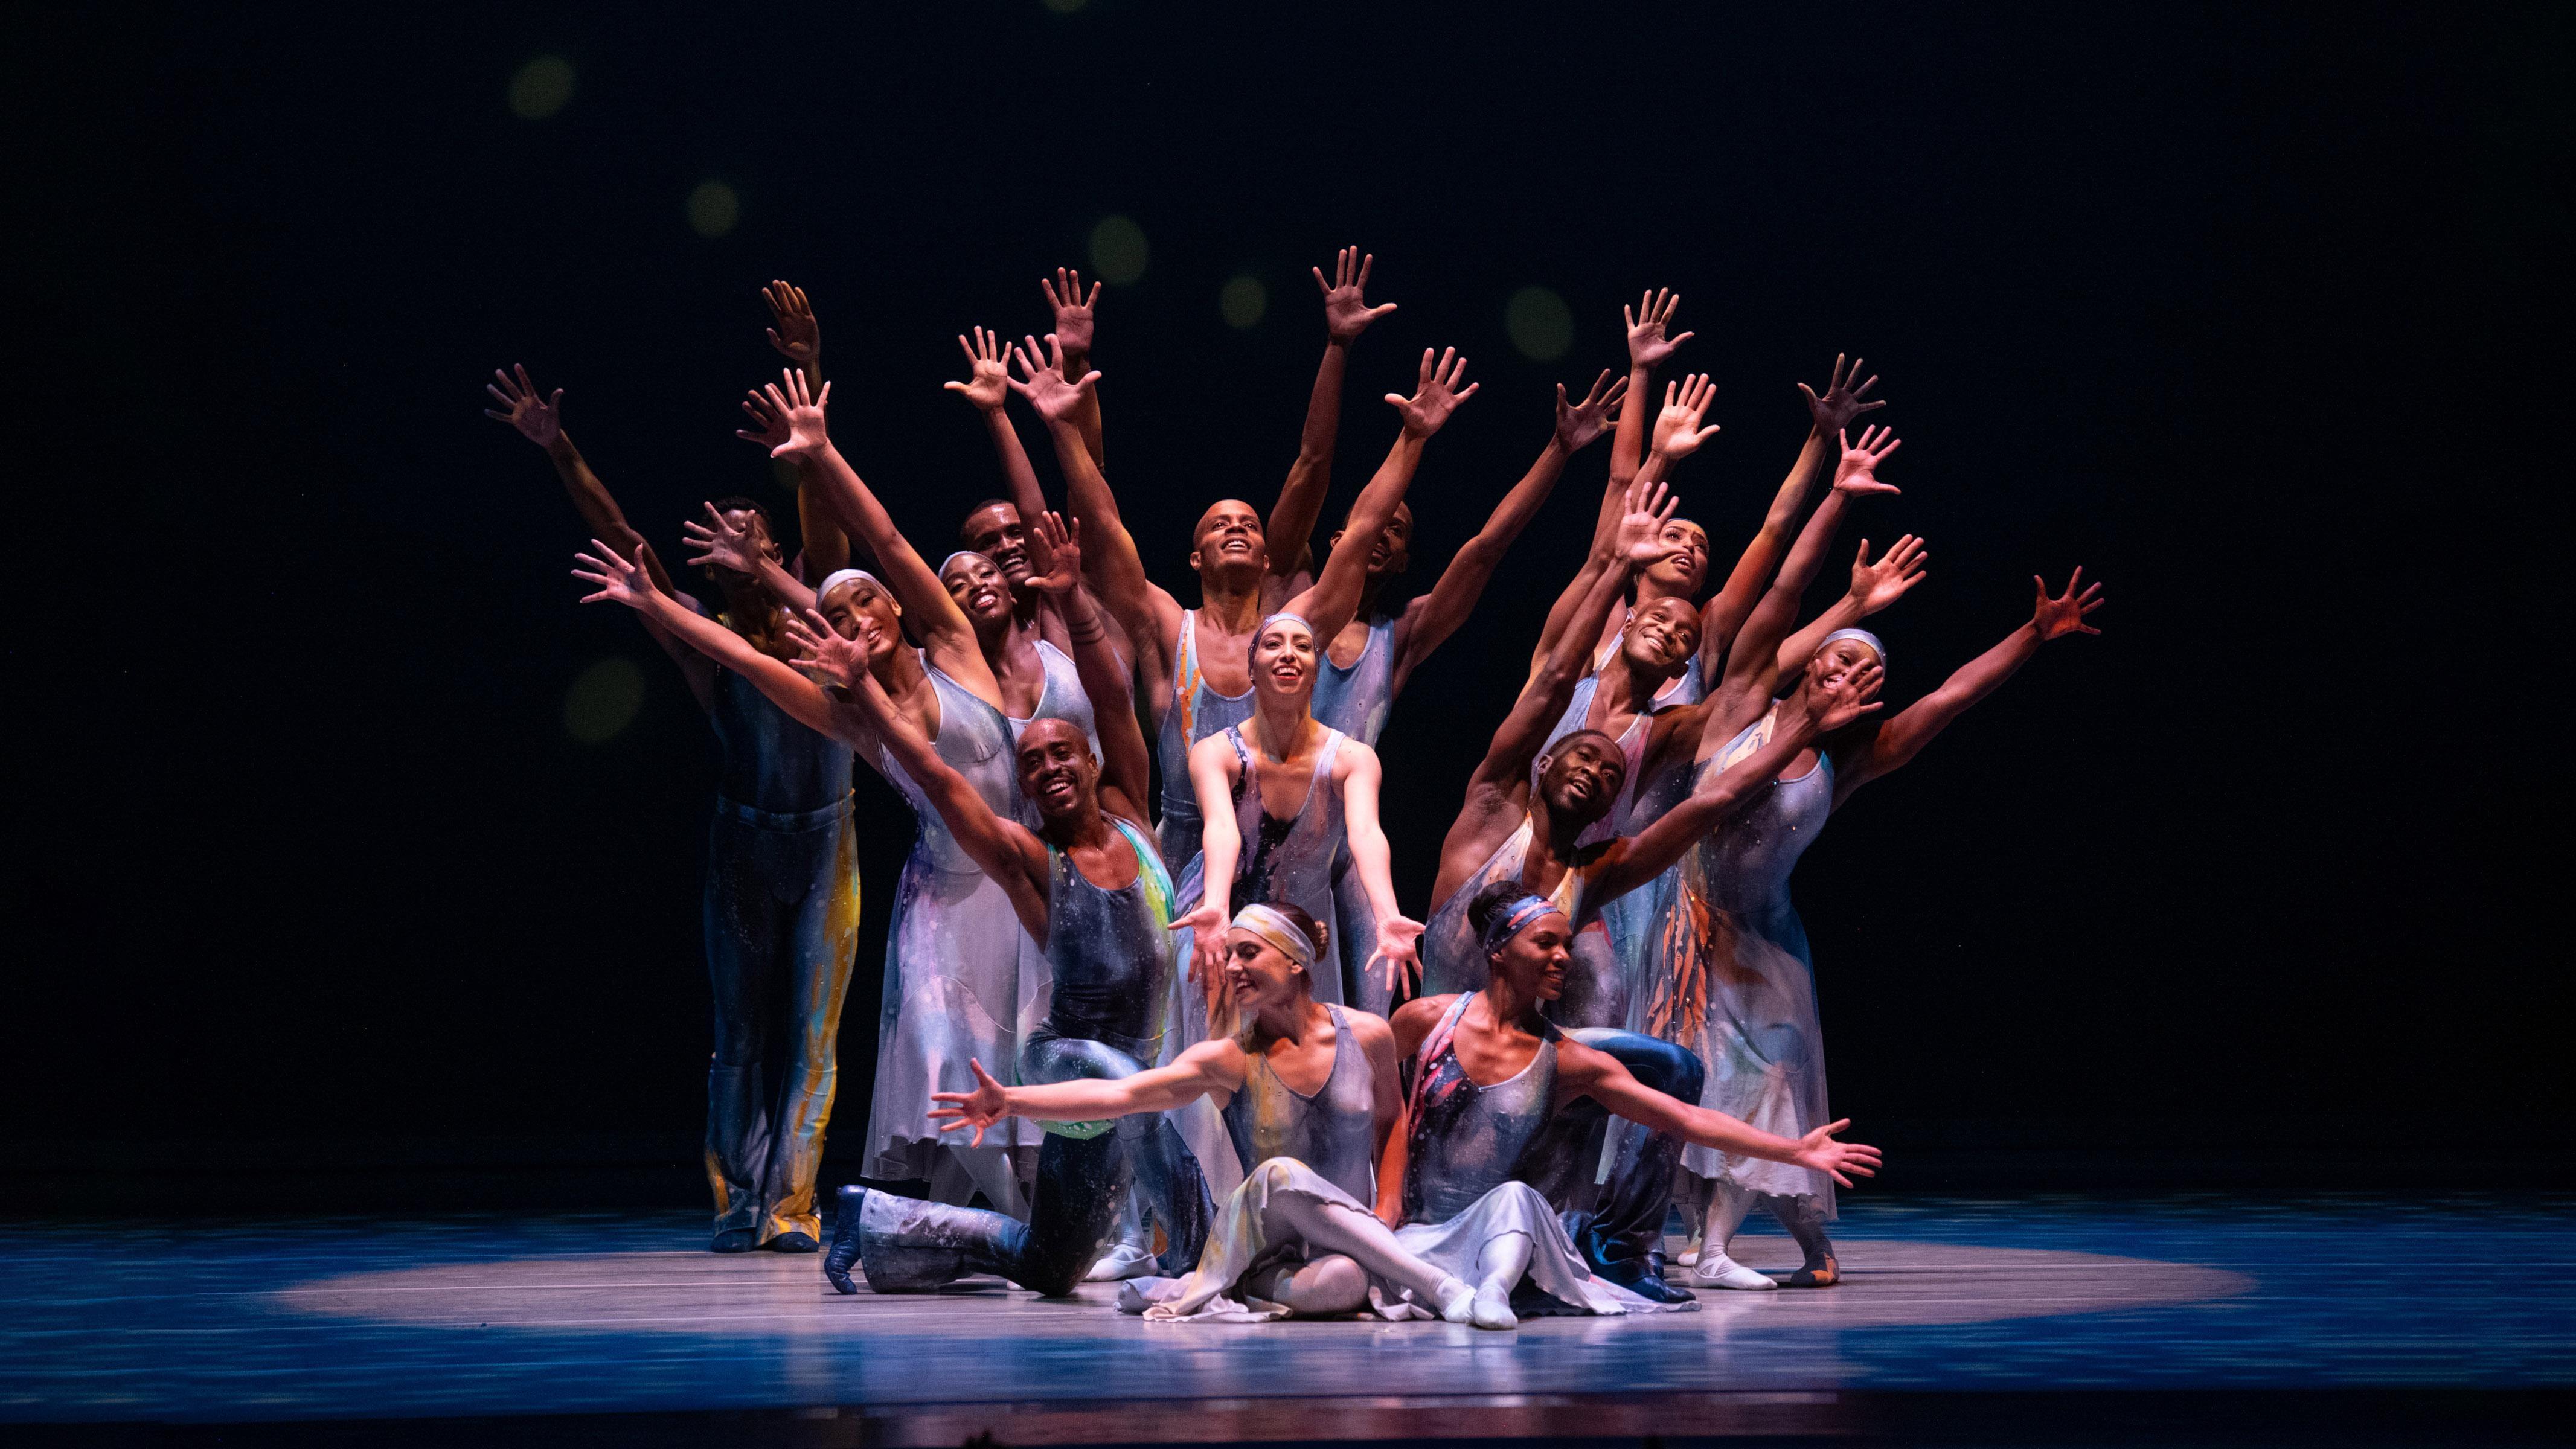 Alvin Ailey American Dance Theater in Alvin Ailey's 'Night Creature', photo by Christopher Duggan.